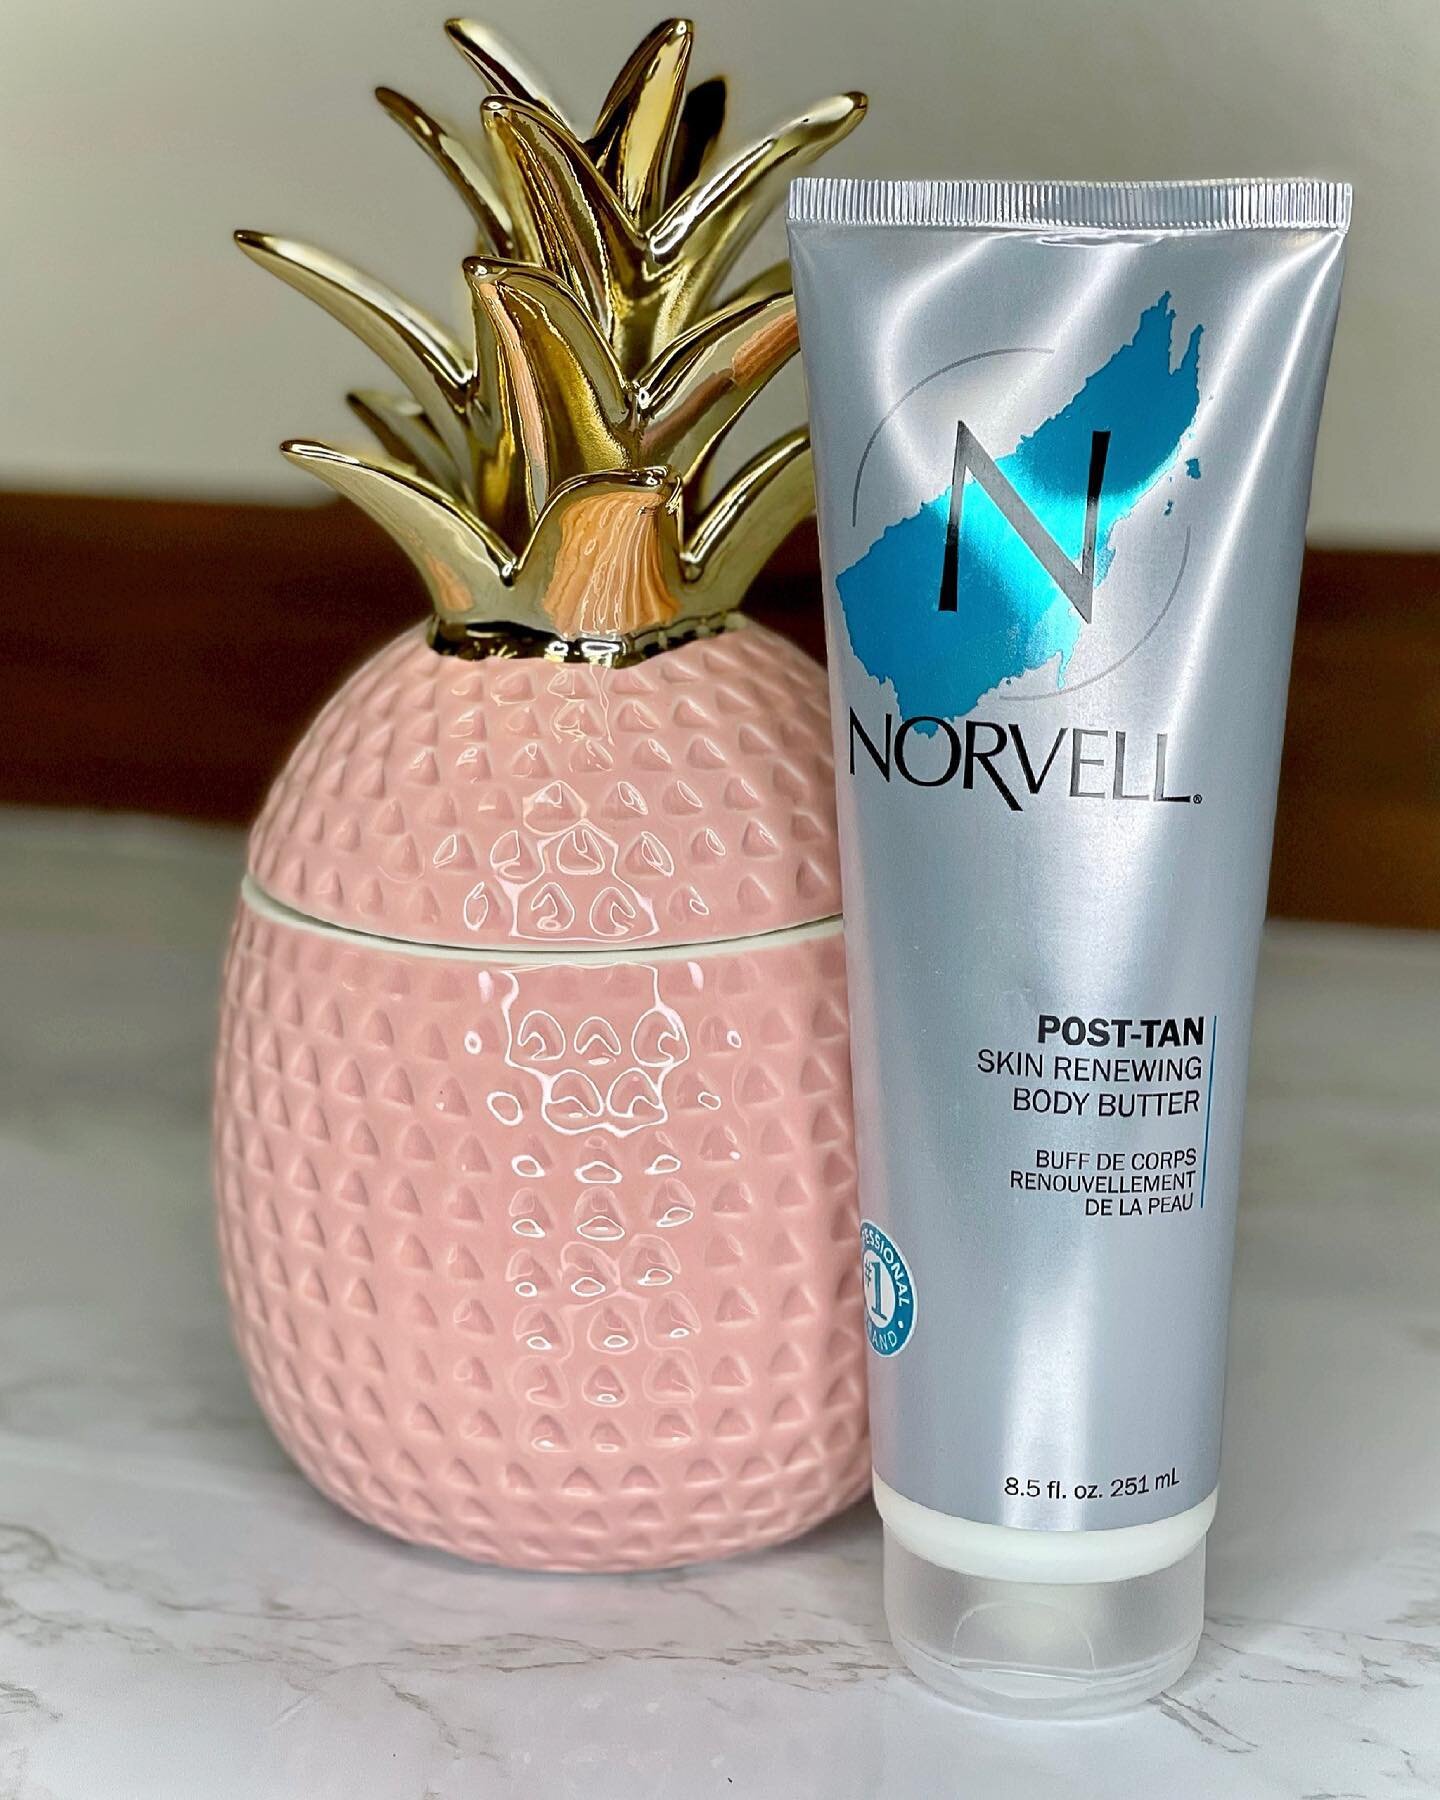 Choosing a post tan lotion can be hard! Especially finding one that is spray tan safe and ACTUALLY hydrating. 

This skin renewing body butter is my absolute favorite aftercare lotion! It is thick and creamy and leaves your skin feeling plump and nou